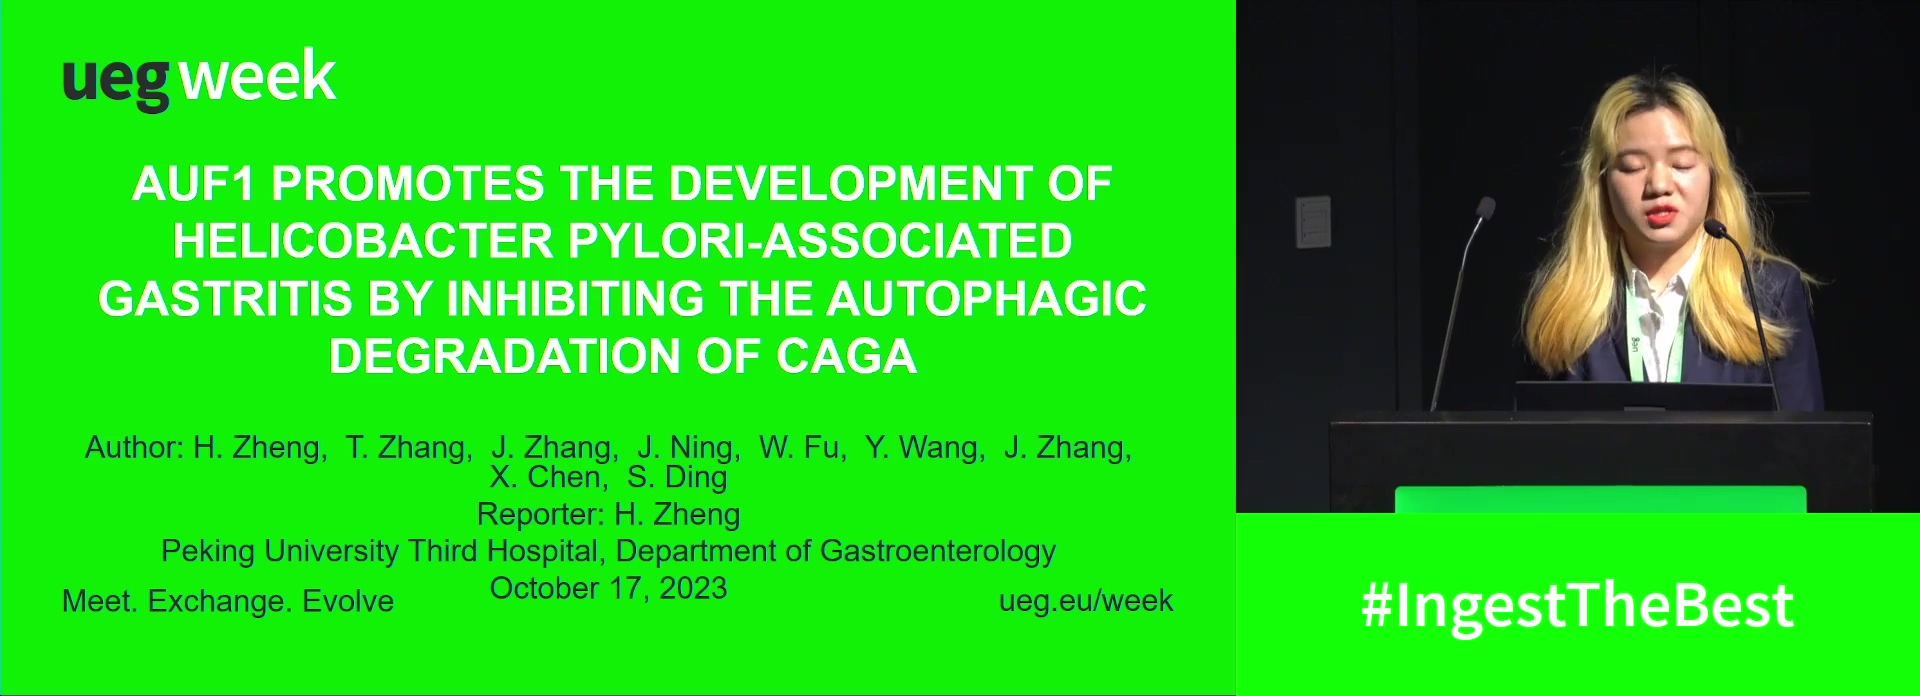 AUF1 PROMOTES THE DEVELOPMENT OF HELICOBACTER PYLORI-ASSOCIATED GASTRITIS BY INHIBITING THE AUTOPHAGIC DEGRADATION OF CAGA